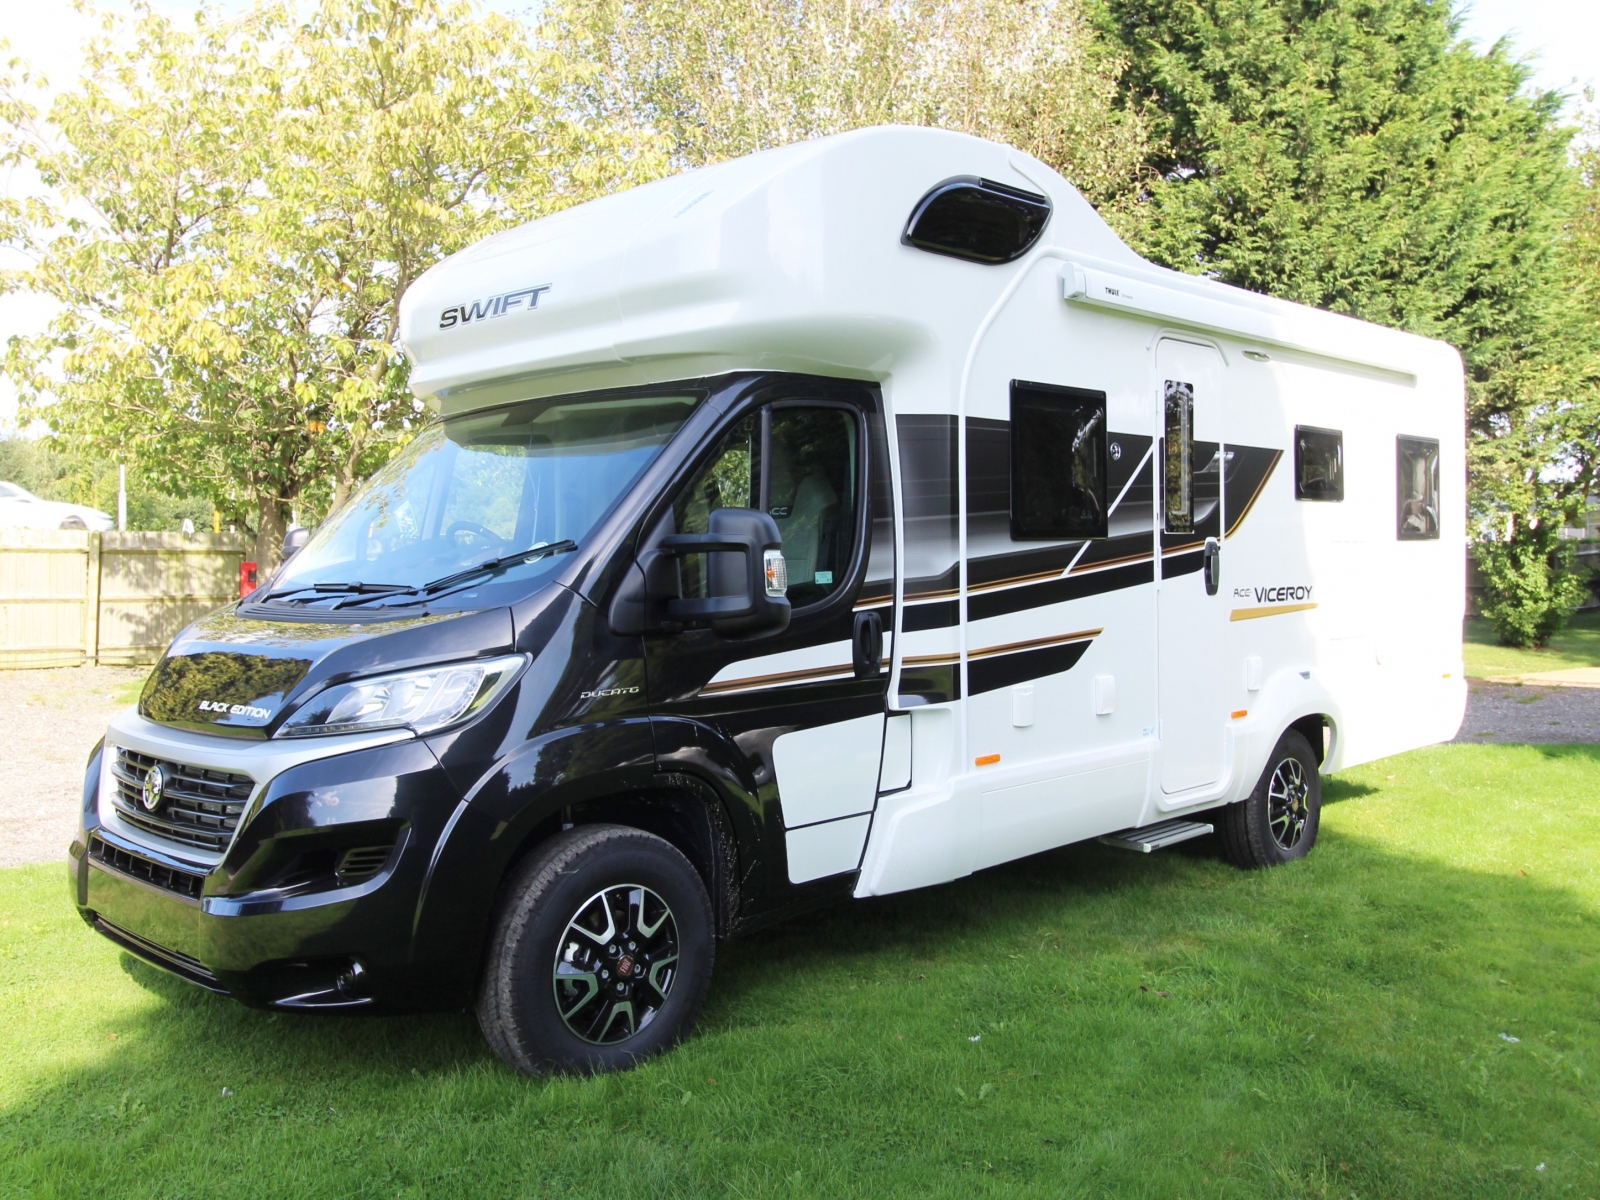 Swift Globetrotter 2020 - Wandahome Special Edition image